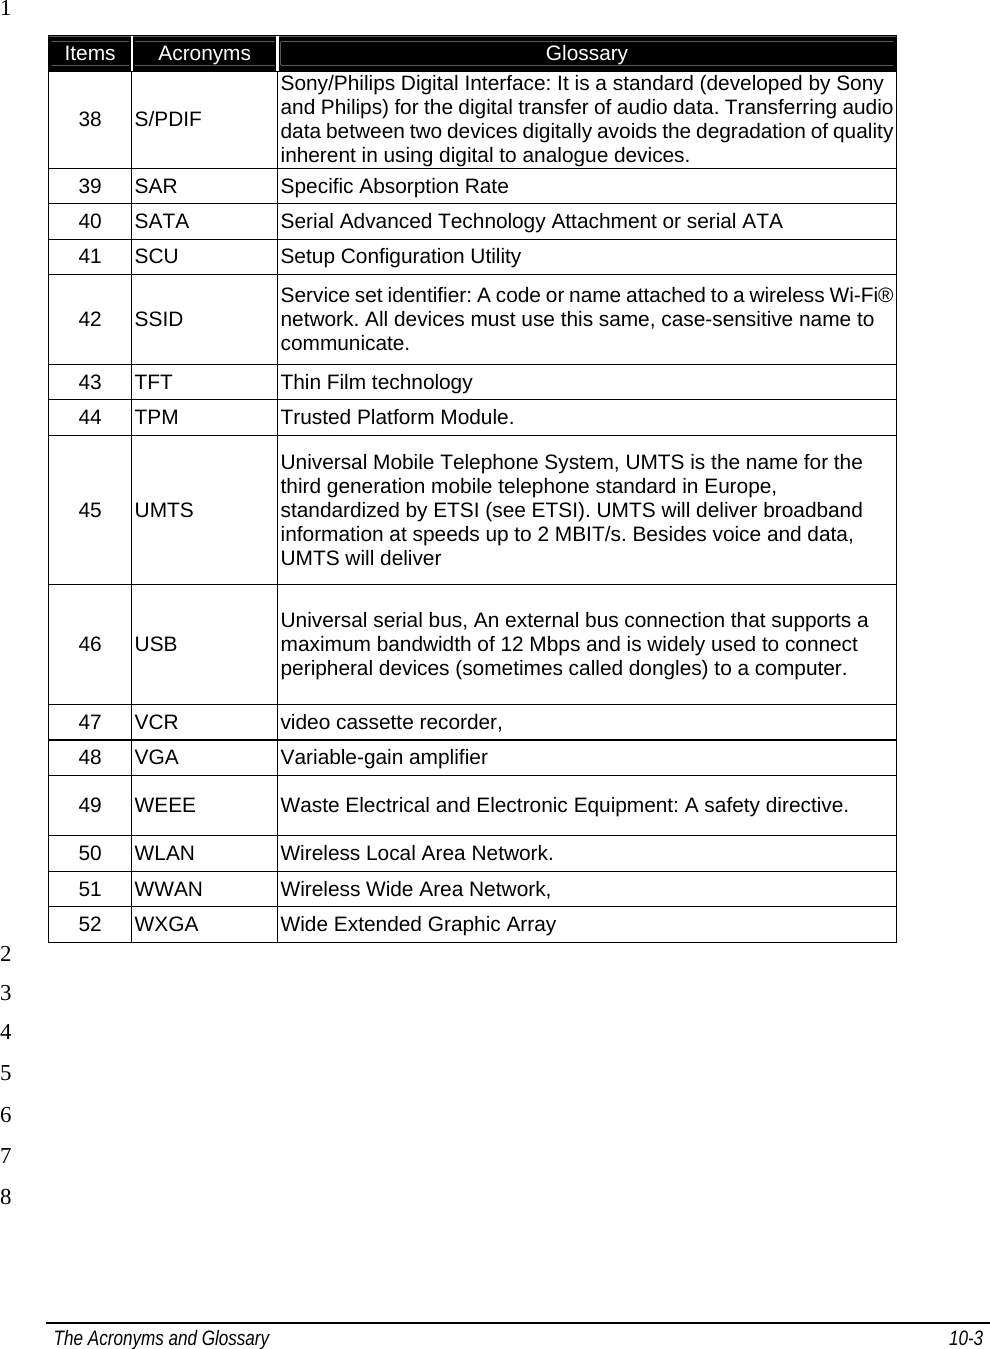  The Acronyms and Glossary   10-3  1 Items  Acronyms   Glossary 38 S/PDIF Sony/Philips Digital Interface: It is a standard (developed by Sony and Philips) for the digital transfer of audio data. Transferring audio data between two devices digitally avoids the degradation of quality inherent in using digital to analogue devices. 39 SAR  Specific Absorption Rate 40  SATA  Serial Advanced Technology Attachment or serial ATA 41 SCU  Setup Configuration Utility 42 SSID  Service set identifier: A code or name attached to a wireless Wi-Fi® network. All devices must use this same, case-sensitive name to communicate. 43  TFT  Thin Film technology 44  TPM  Trusted Platform Module. 45 UMTS Universal Mobile Telephone System, UMTS is the name for the third generation mobile telephone standard in Europe, standardized by ETSI (see ETSI). UMTS will deliver broadband information at speeds up to 2 MBIT/s. Besides voice and data, UMTS will deliver  46 USB  Universal serial bus, An external bus connection that supports a maximum bandwidth of 12 Mbps and is widely used to connect peripheral devices (sometimes called dongles) to a computer. 47  VCR  video cassette recorder, 48  VGA  Variable-gain amplifier  49  WEEE  Waste Electrical and Electronic Equipment: A safety directive. 50  WLAN  Wireless Local Area Network. 51  WWAN  Wireless Wide Area Network,  52  WXGA  Wide Extended Graphic Array  2  3  4  5  6  7  8 